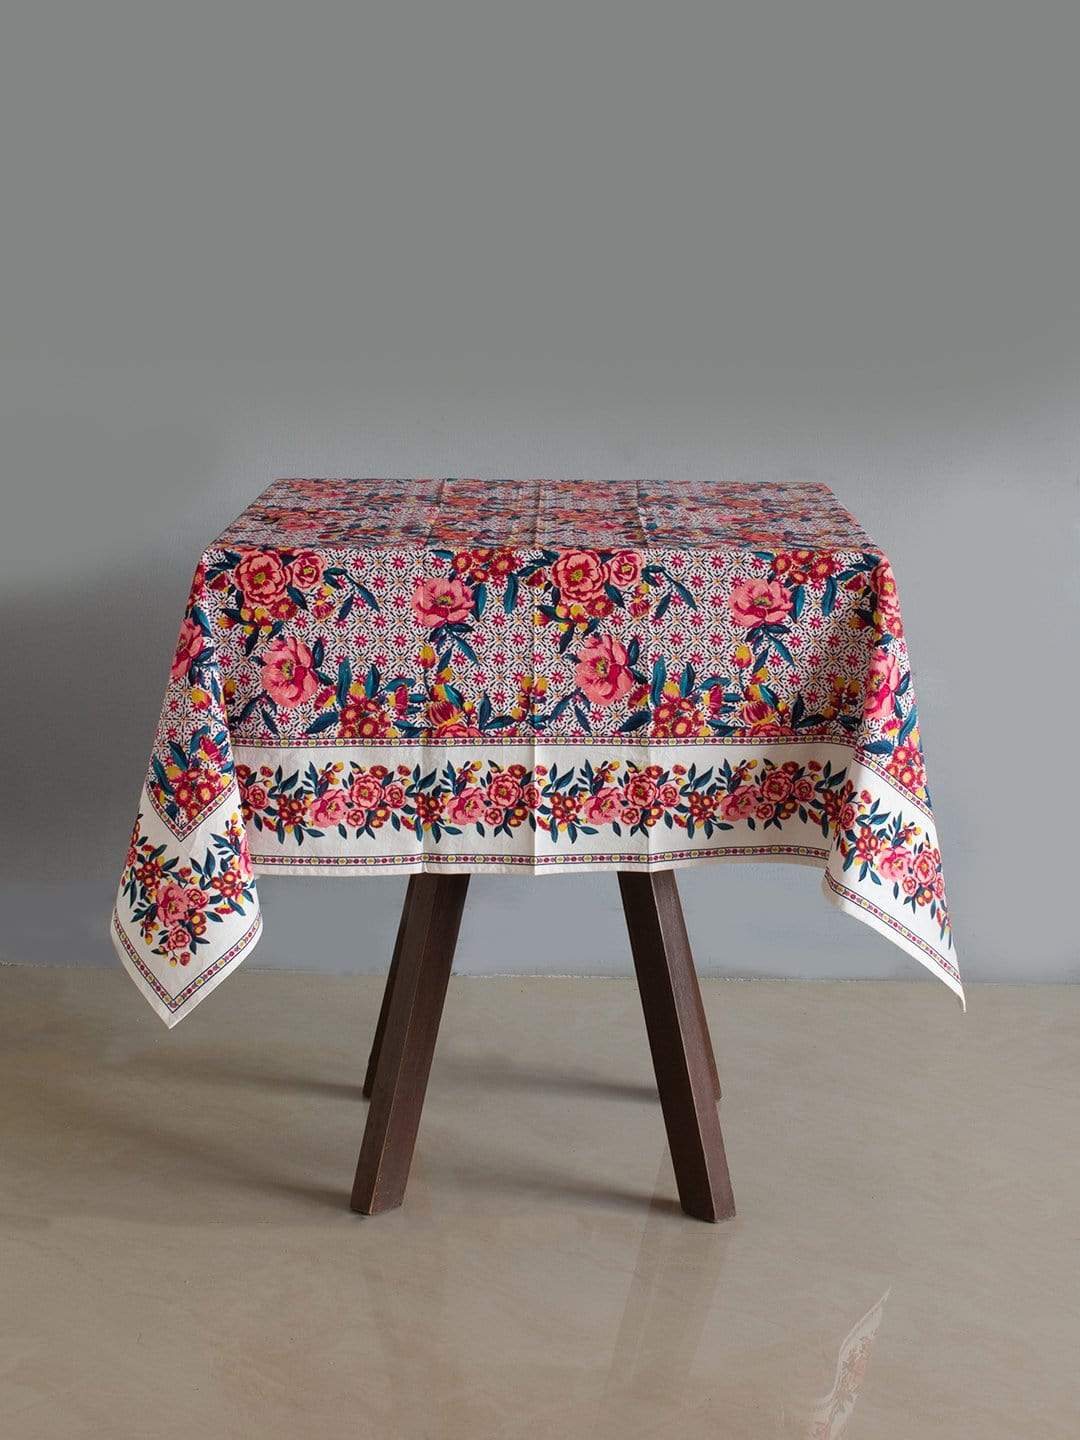 Poppy Petals Table Cover - Square